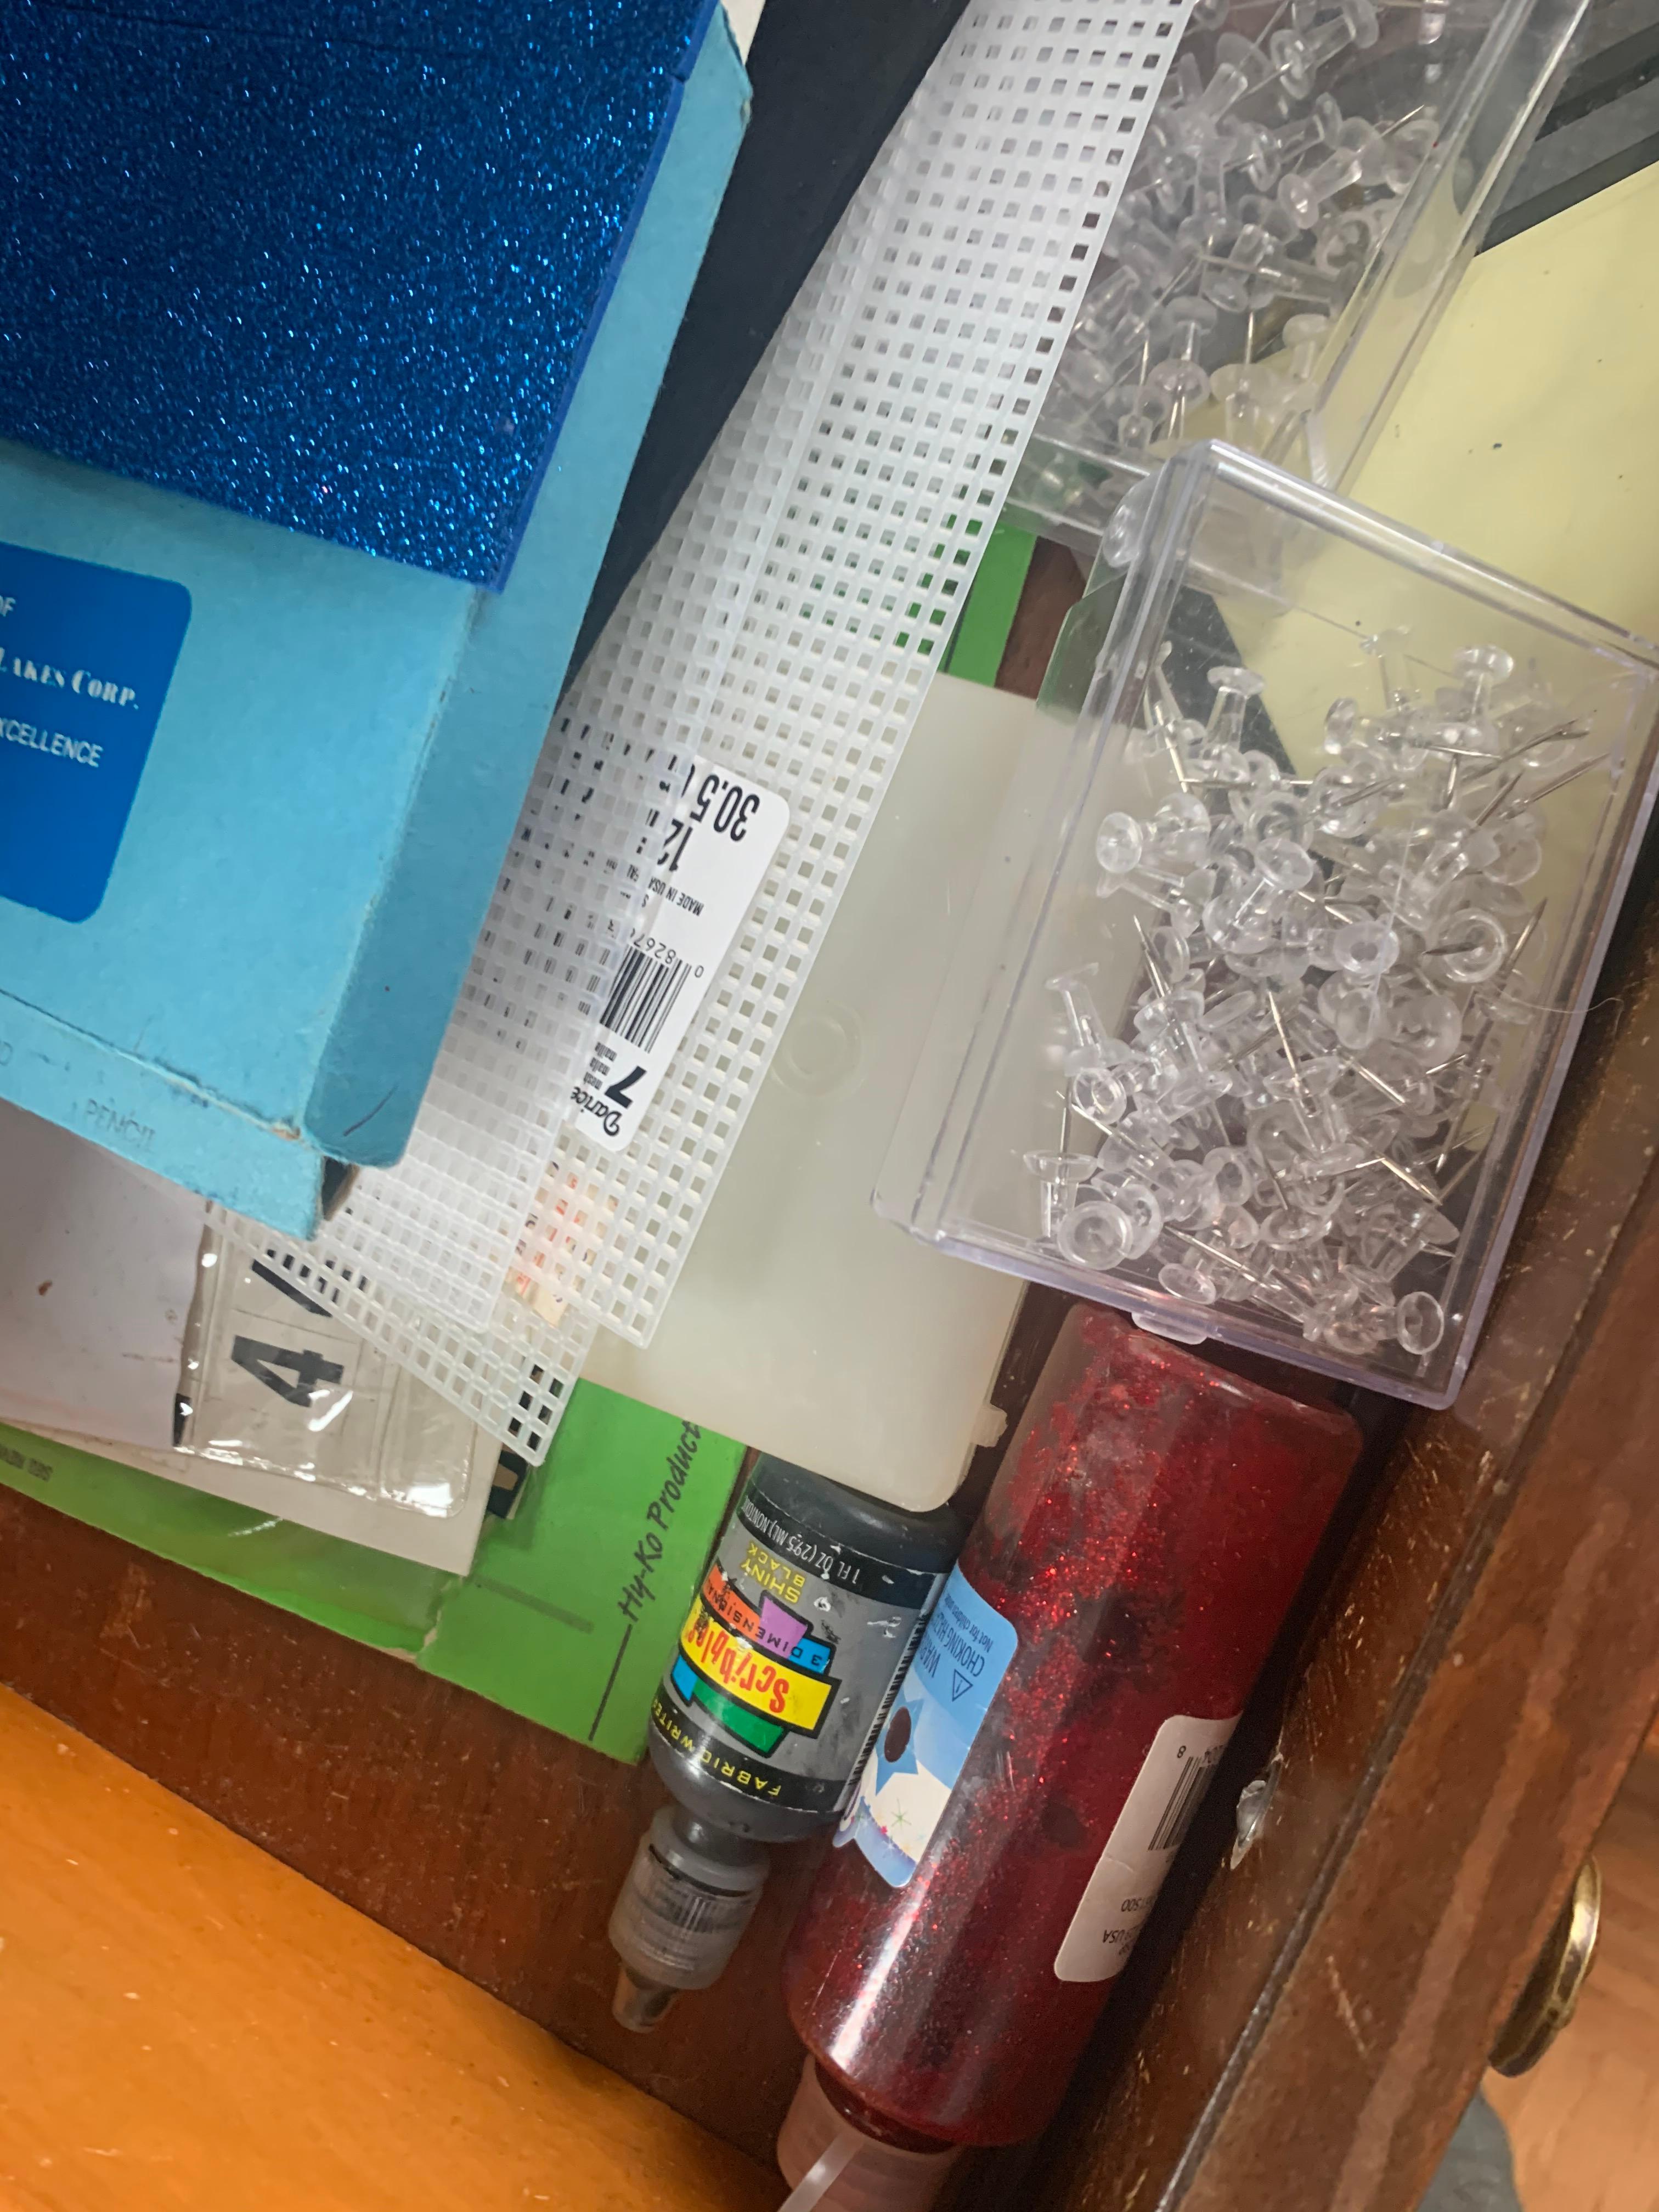 Several Drawers Full Of Crafting Supplies, Glue, Yard, Paper, Etc…